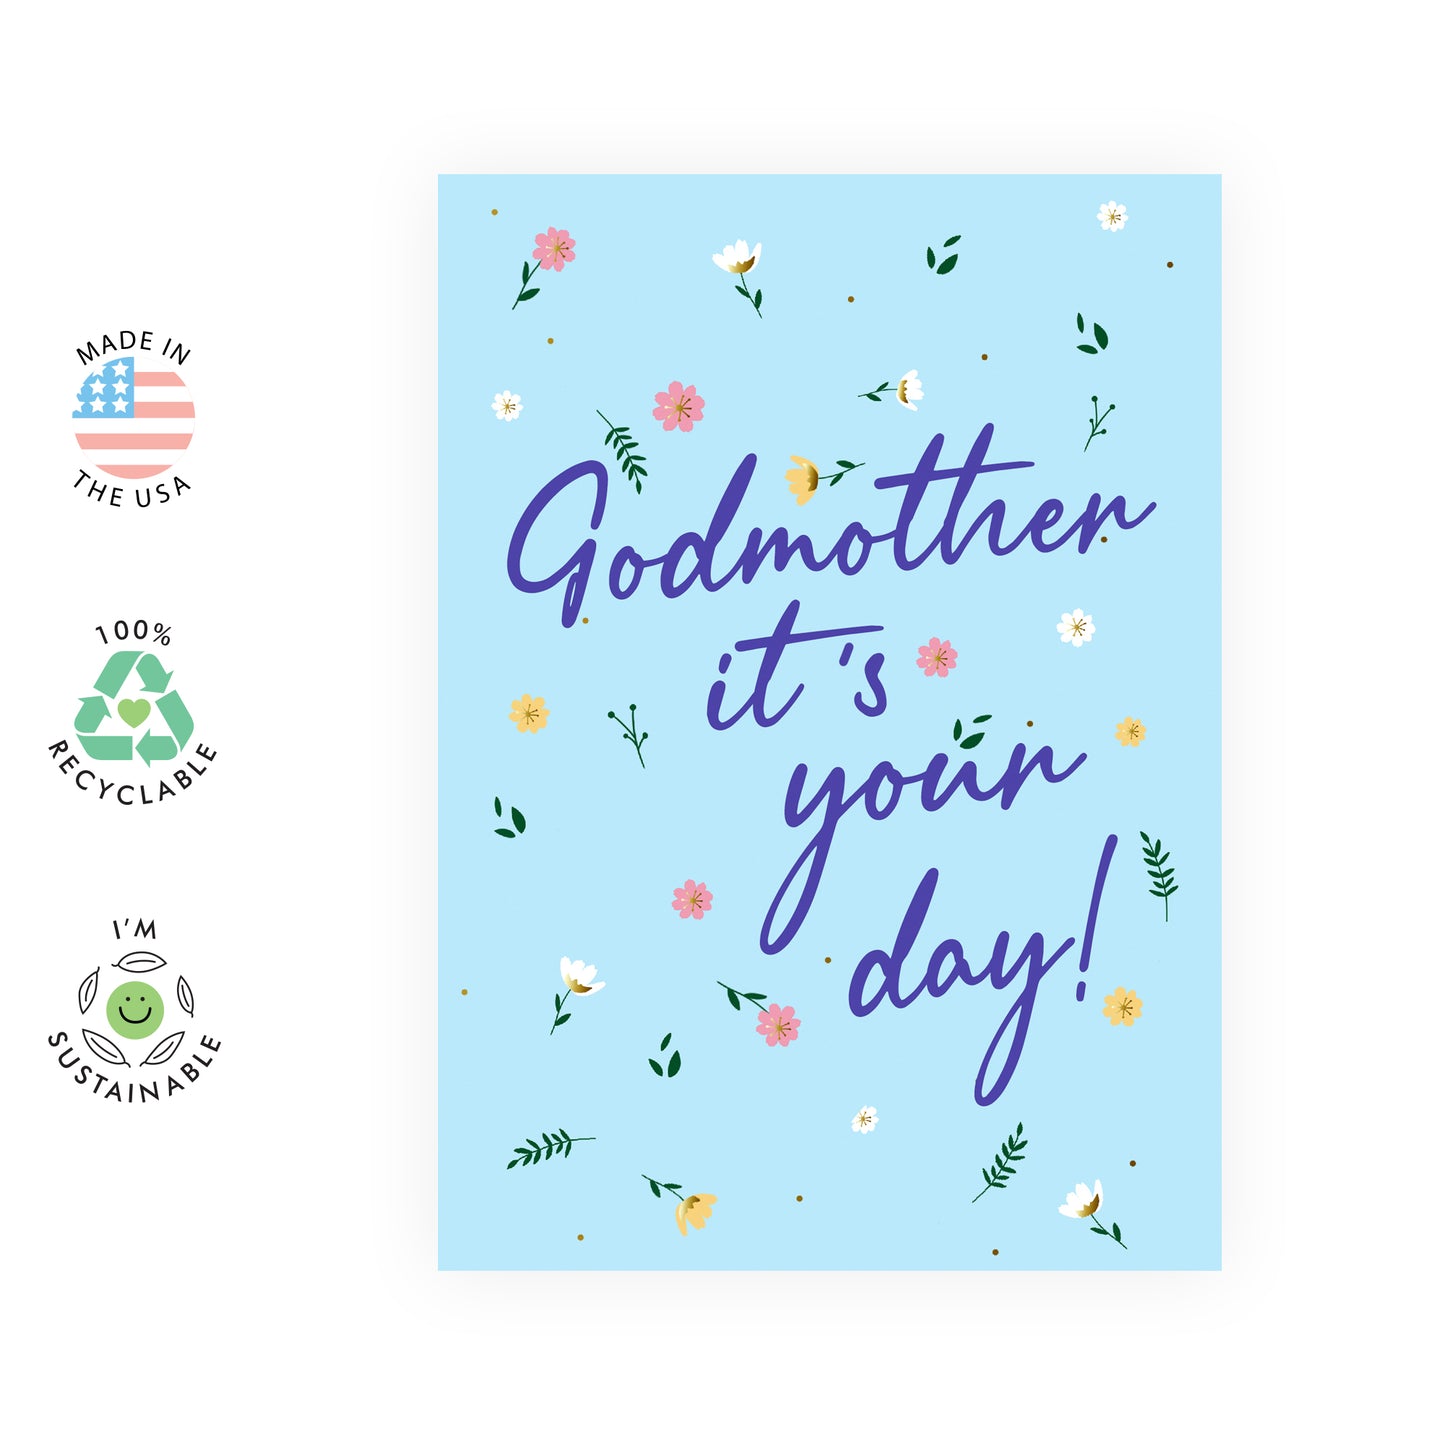 Sweet Birthday Card - Godmother It's Your Day - For Women Her Godmother